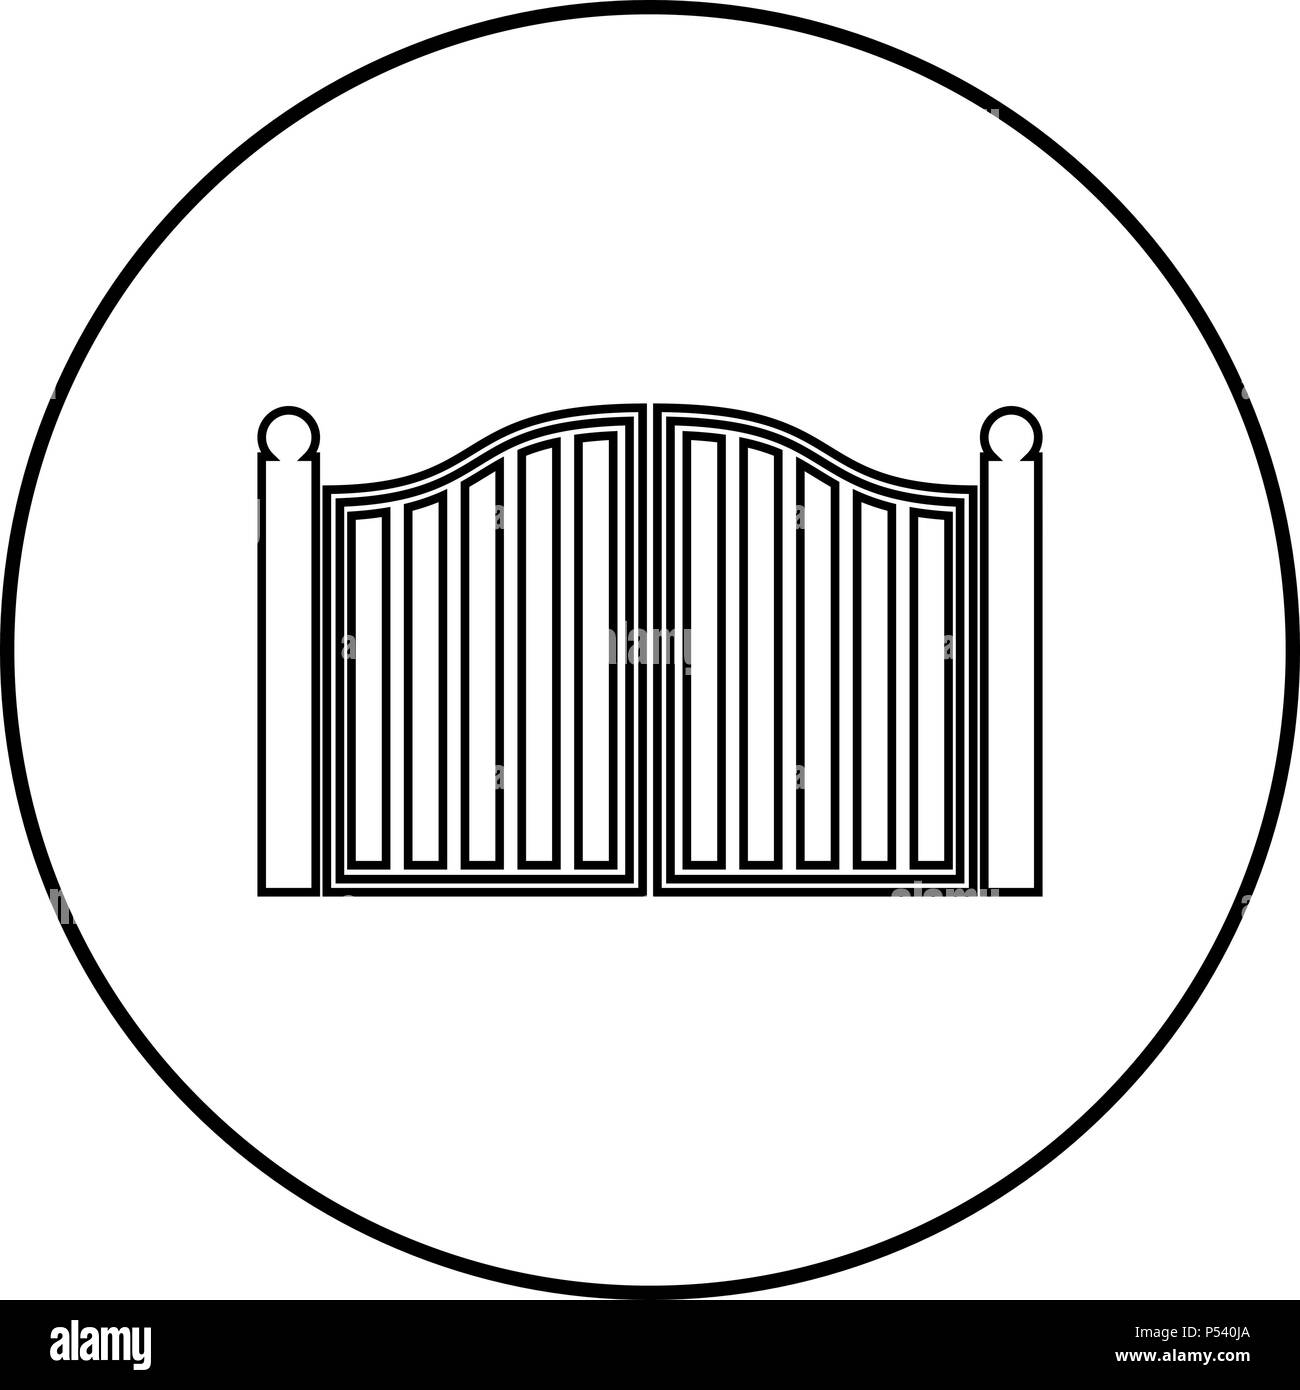 Old gate icon black color in circle round outline Stock Vector